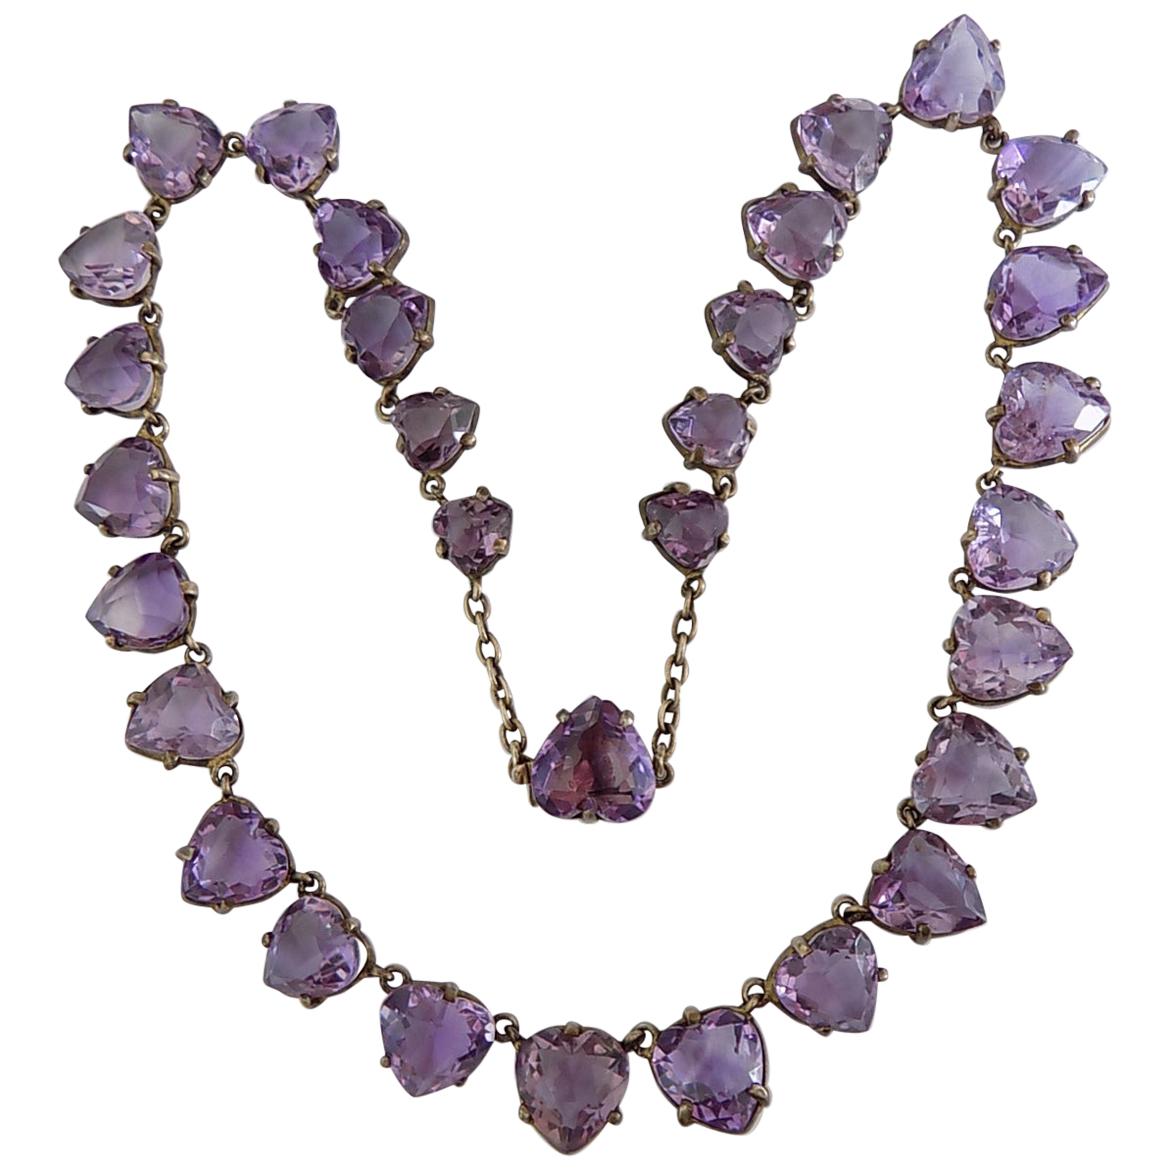 Rare Victorian Silver Gilt and Heart Shaped Amethyst Riviere Necklace